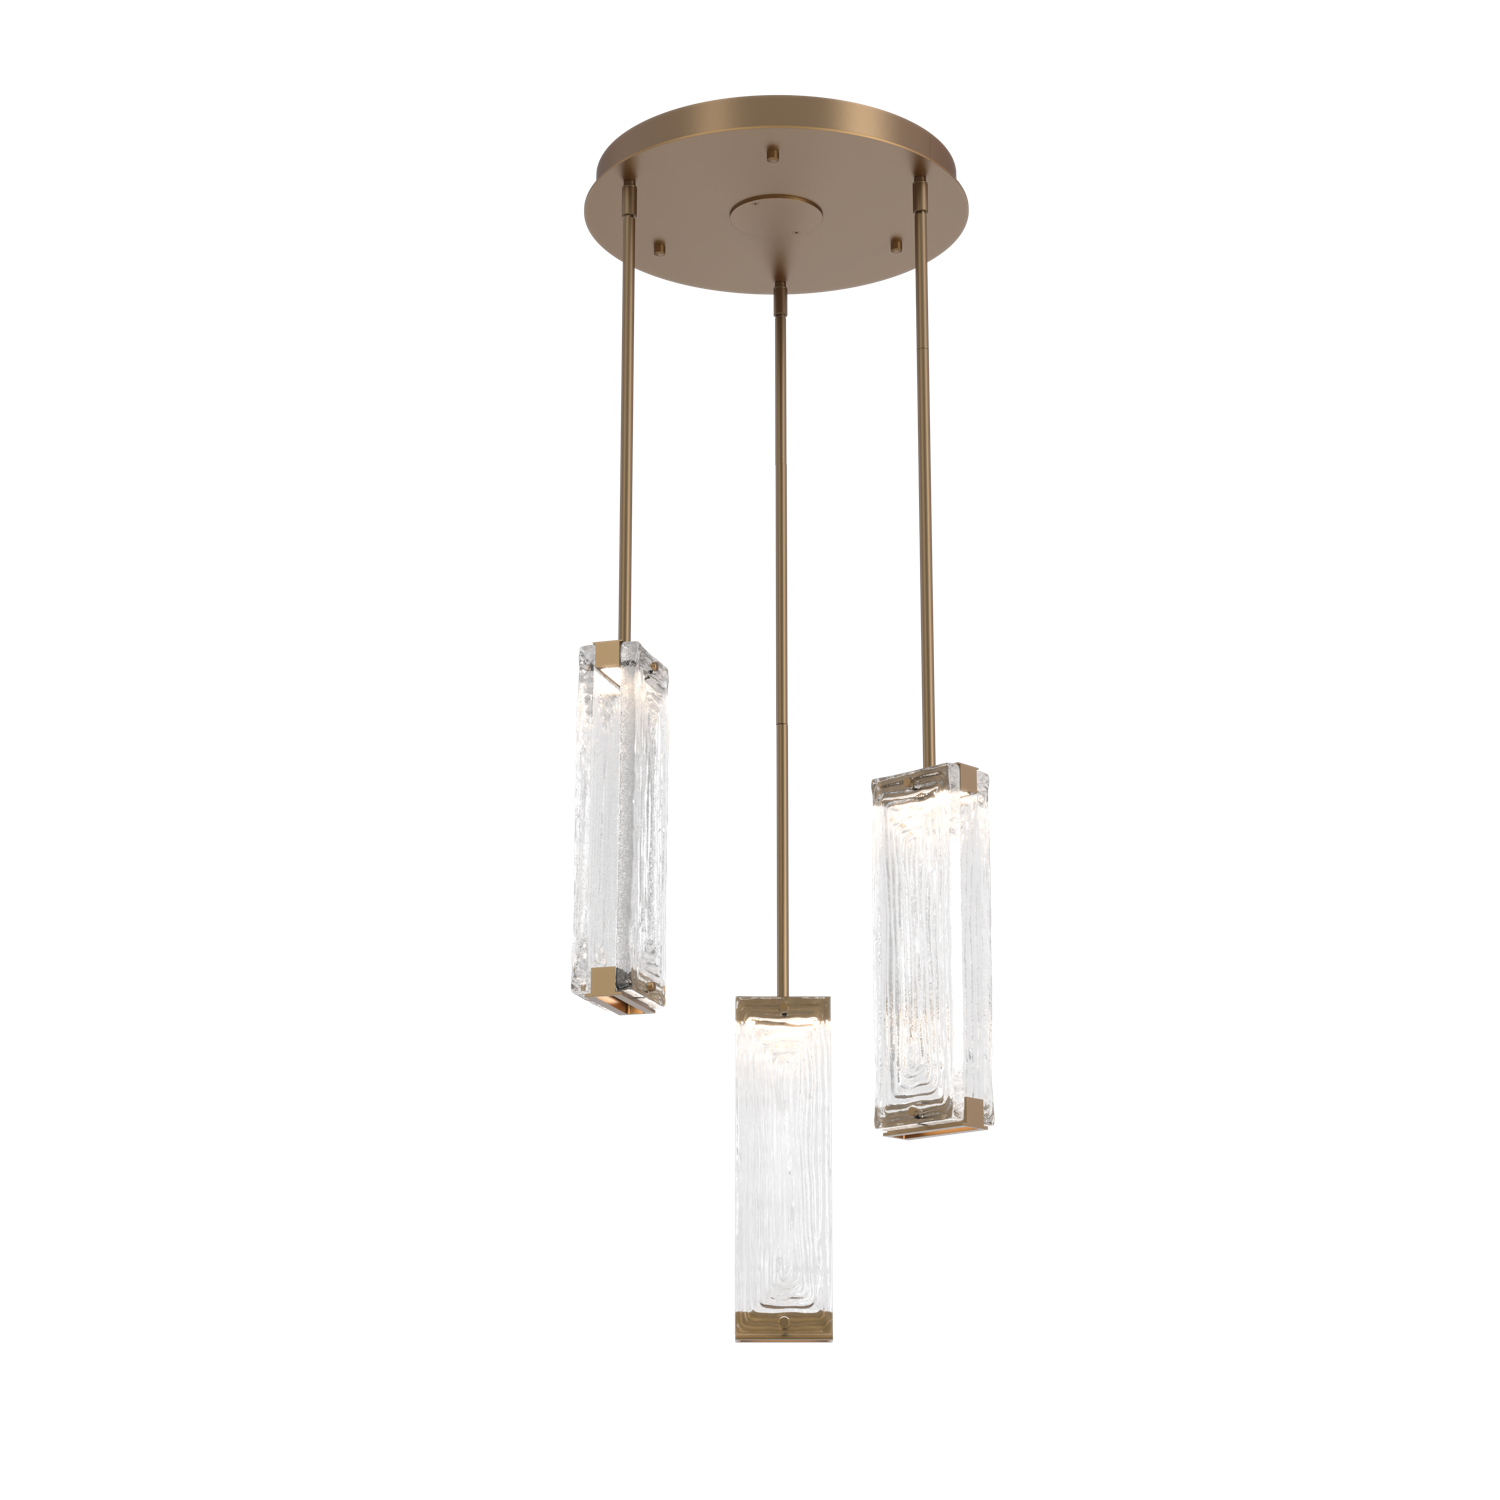 CHB0090-03-NB-TL-Hammerton-Studio-Tabulo-3-light-multi-pendant-chandelier-with-novel-brass-finish-and-clear-linea-cast-glass-shade-and-LED-lamping